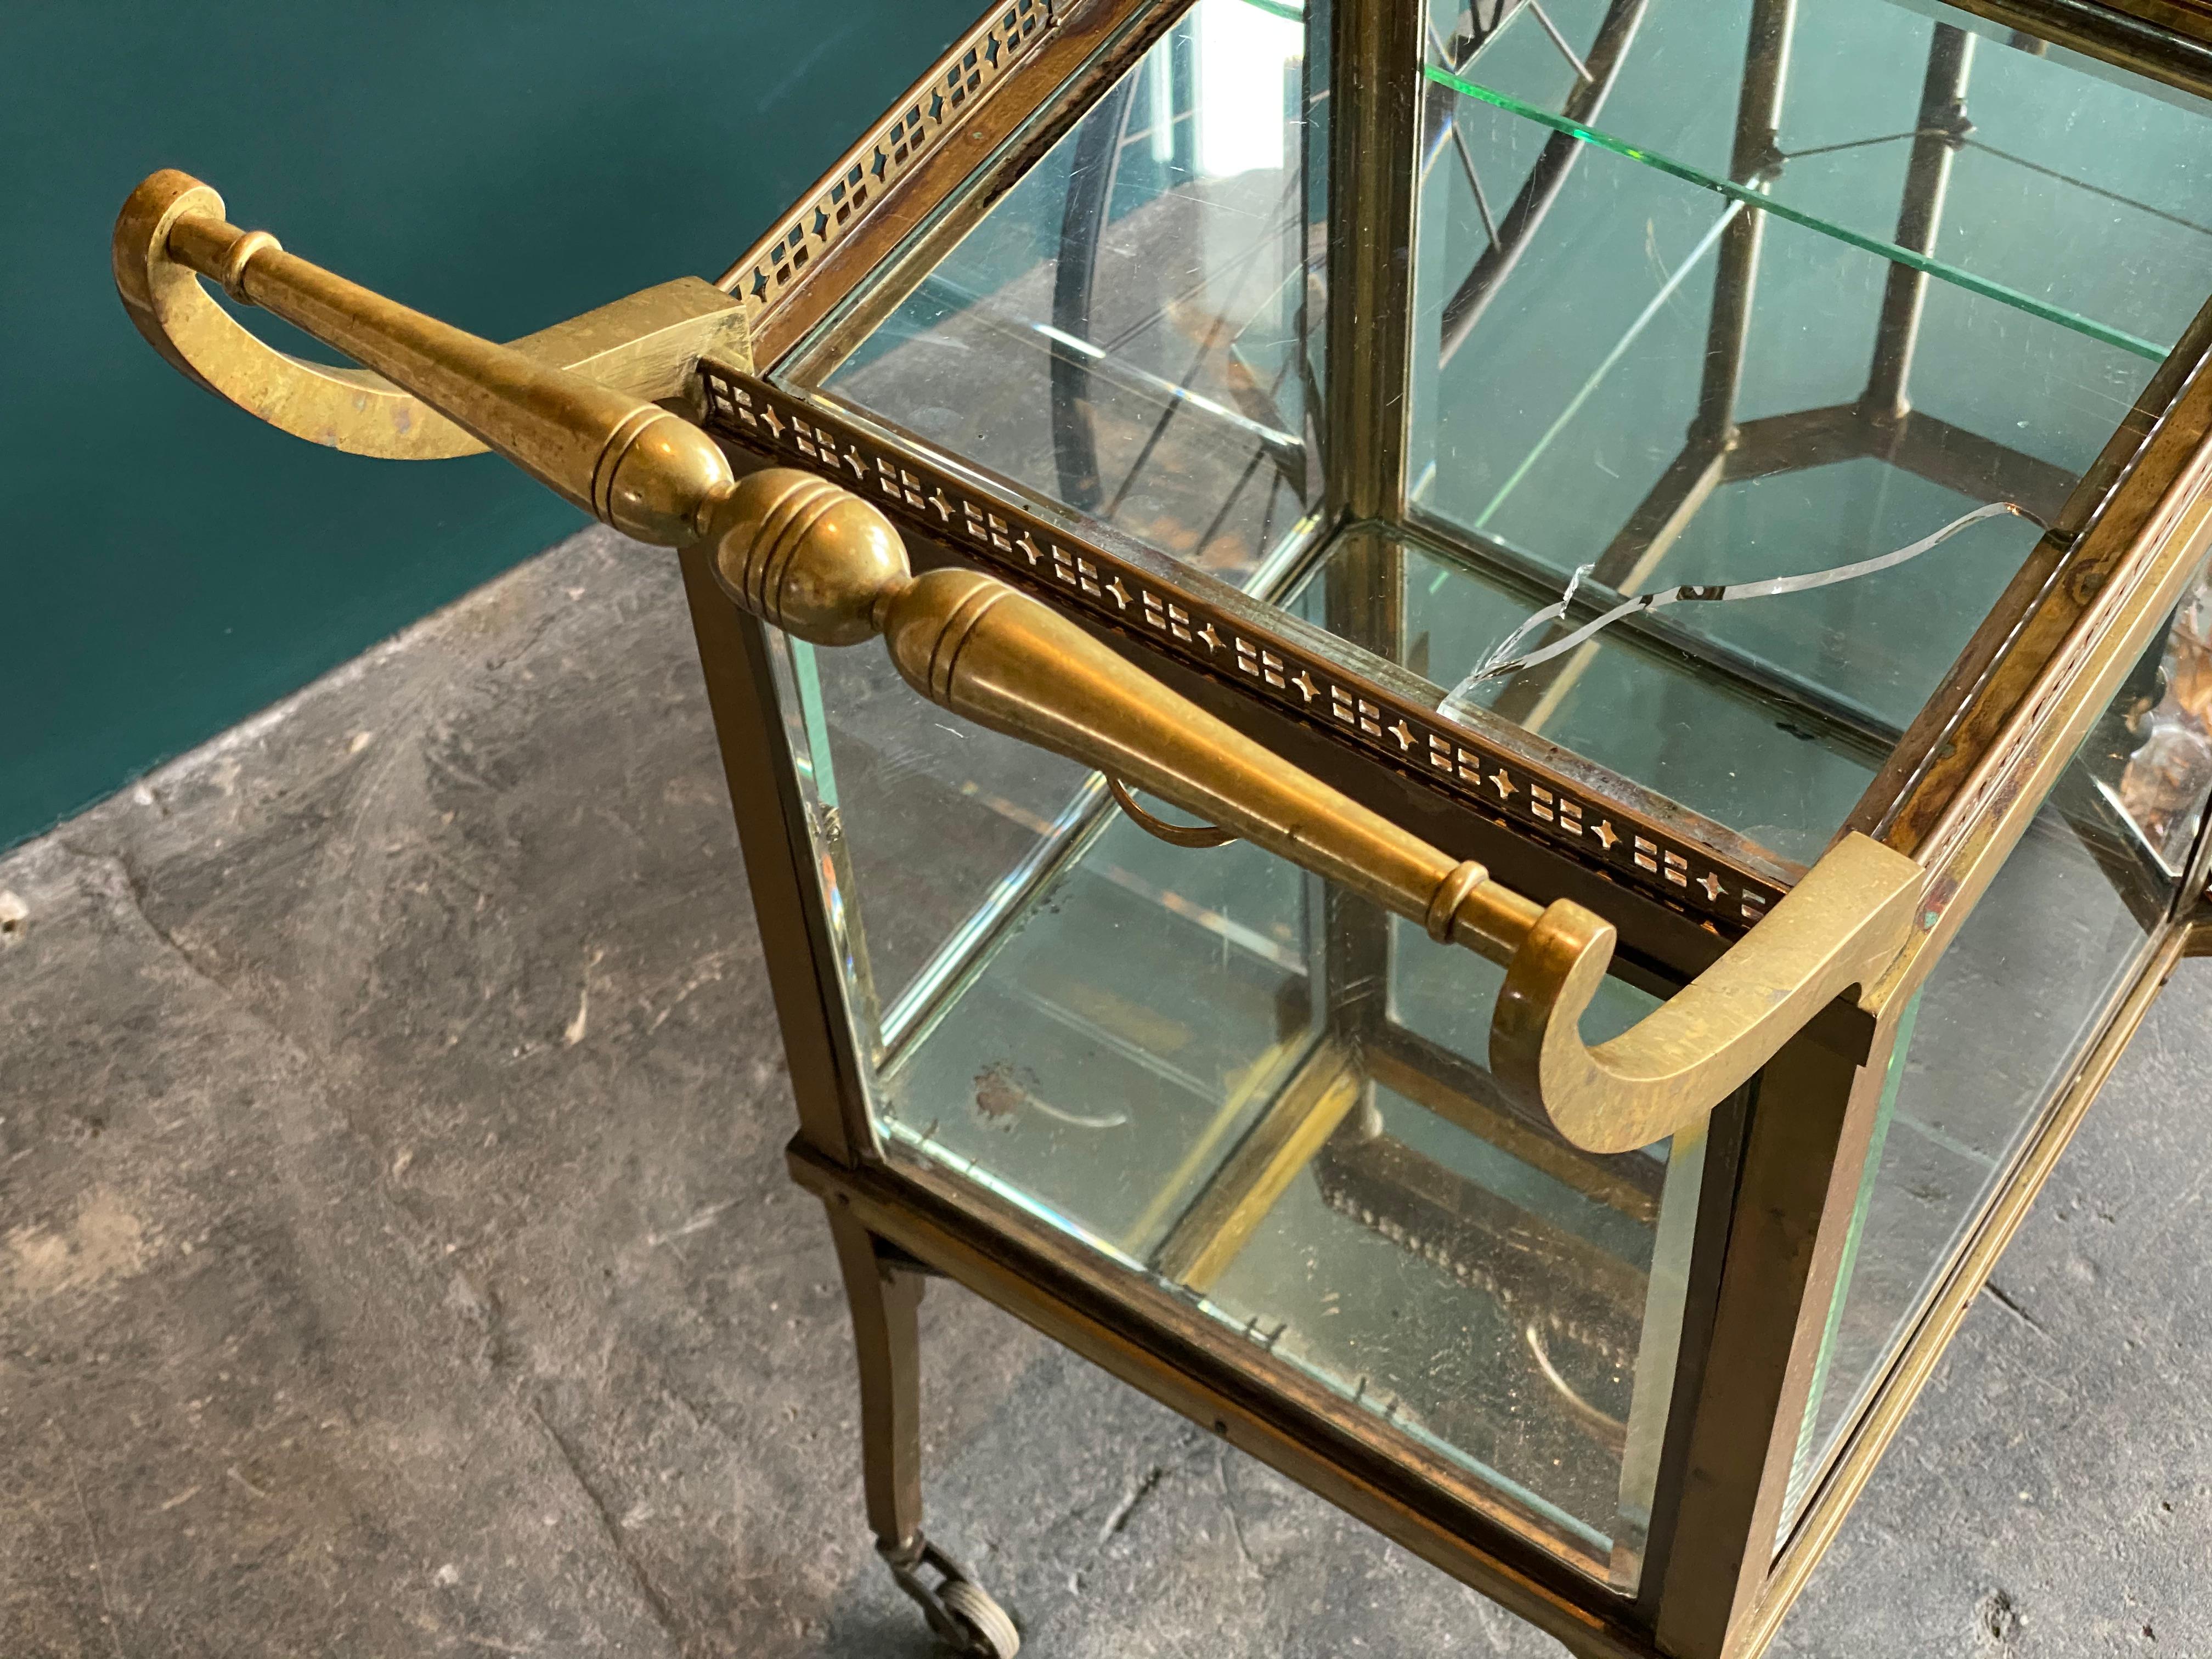 Late 19th Century Antique Brass Bar Carriage/ Tea Trolley/ Table Trolley, Glass Case from a Castle